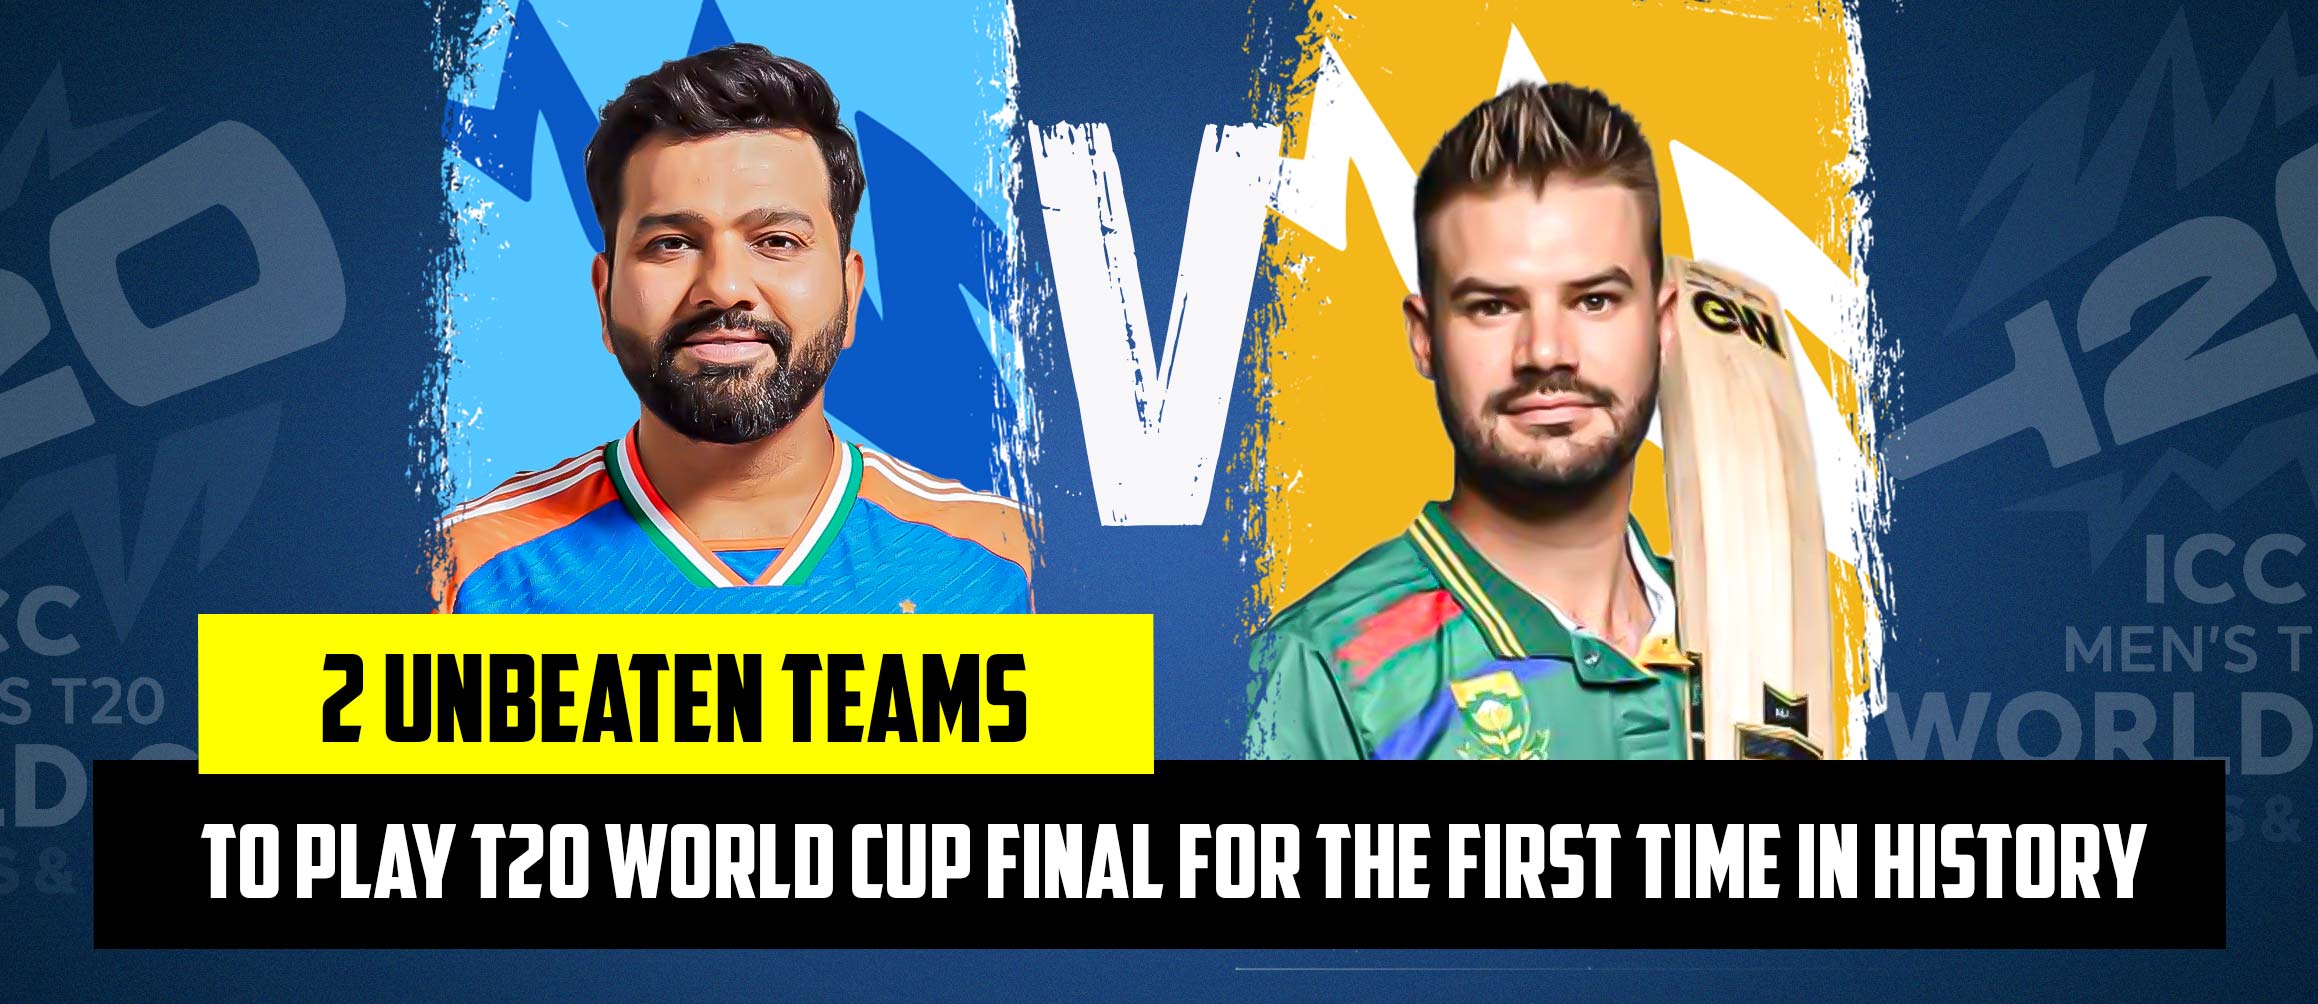 2 Unbeaten Teams to Play T20 World Cup Final for The First Time in History